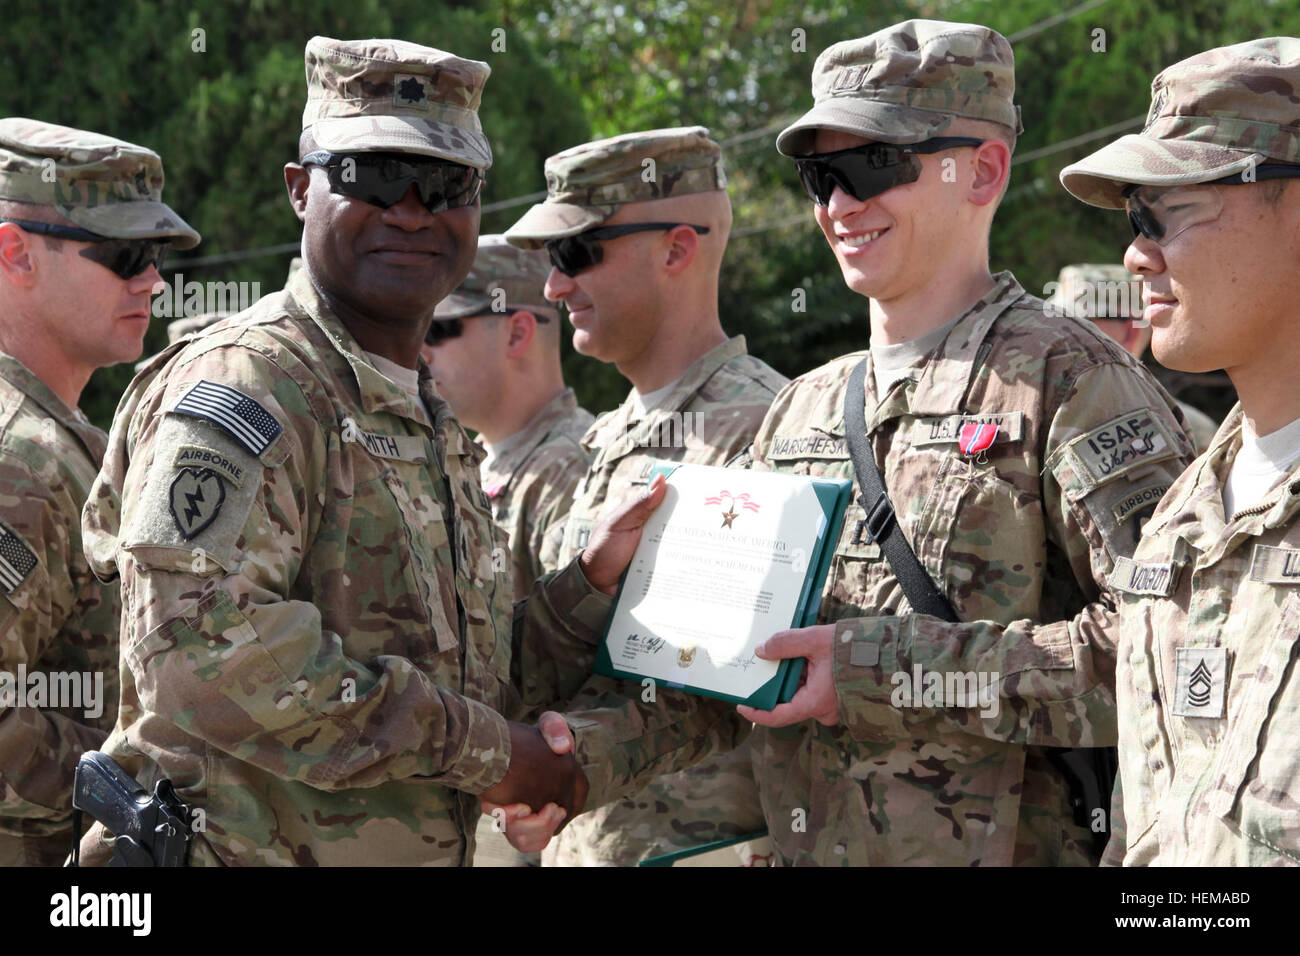 U.S. Army Capt. Thomas Warschefsky with 425th Brigade Special Troops Battalion (Airborne), Task Force 4-25, is awarded the Bronze Star by U.S. Army Lt. Col. Frank Smith, battalion commander for 425th Brigade Special Troops Battalion (Airborne), on Forward Operating Base Salerno, Khost province, Afghanistan, Sept. 24, 2012. Award ceremony 120924-A-PO167-026 Stock Photo